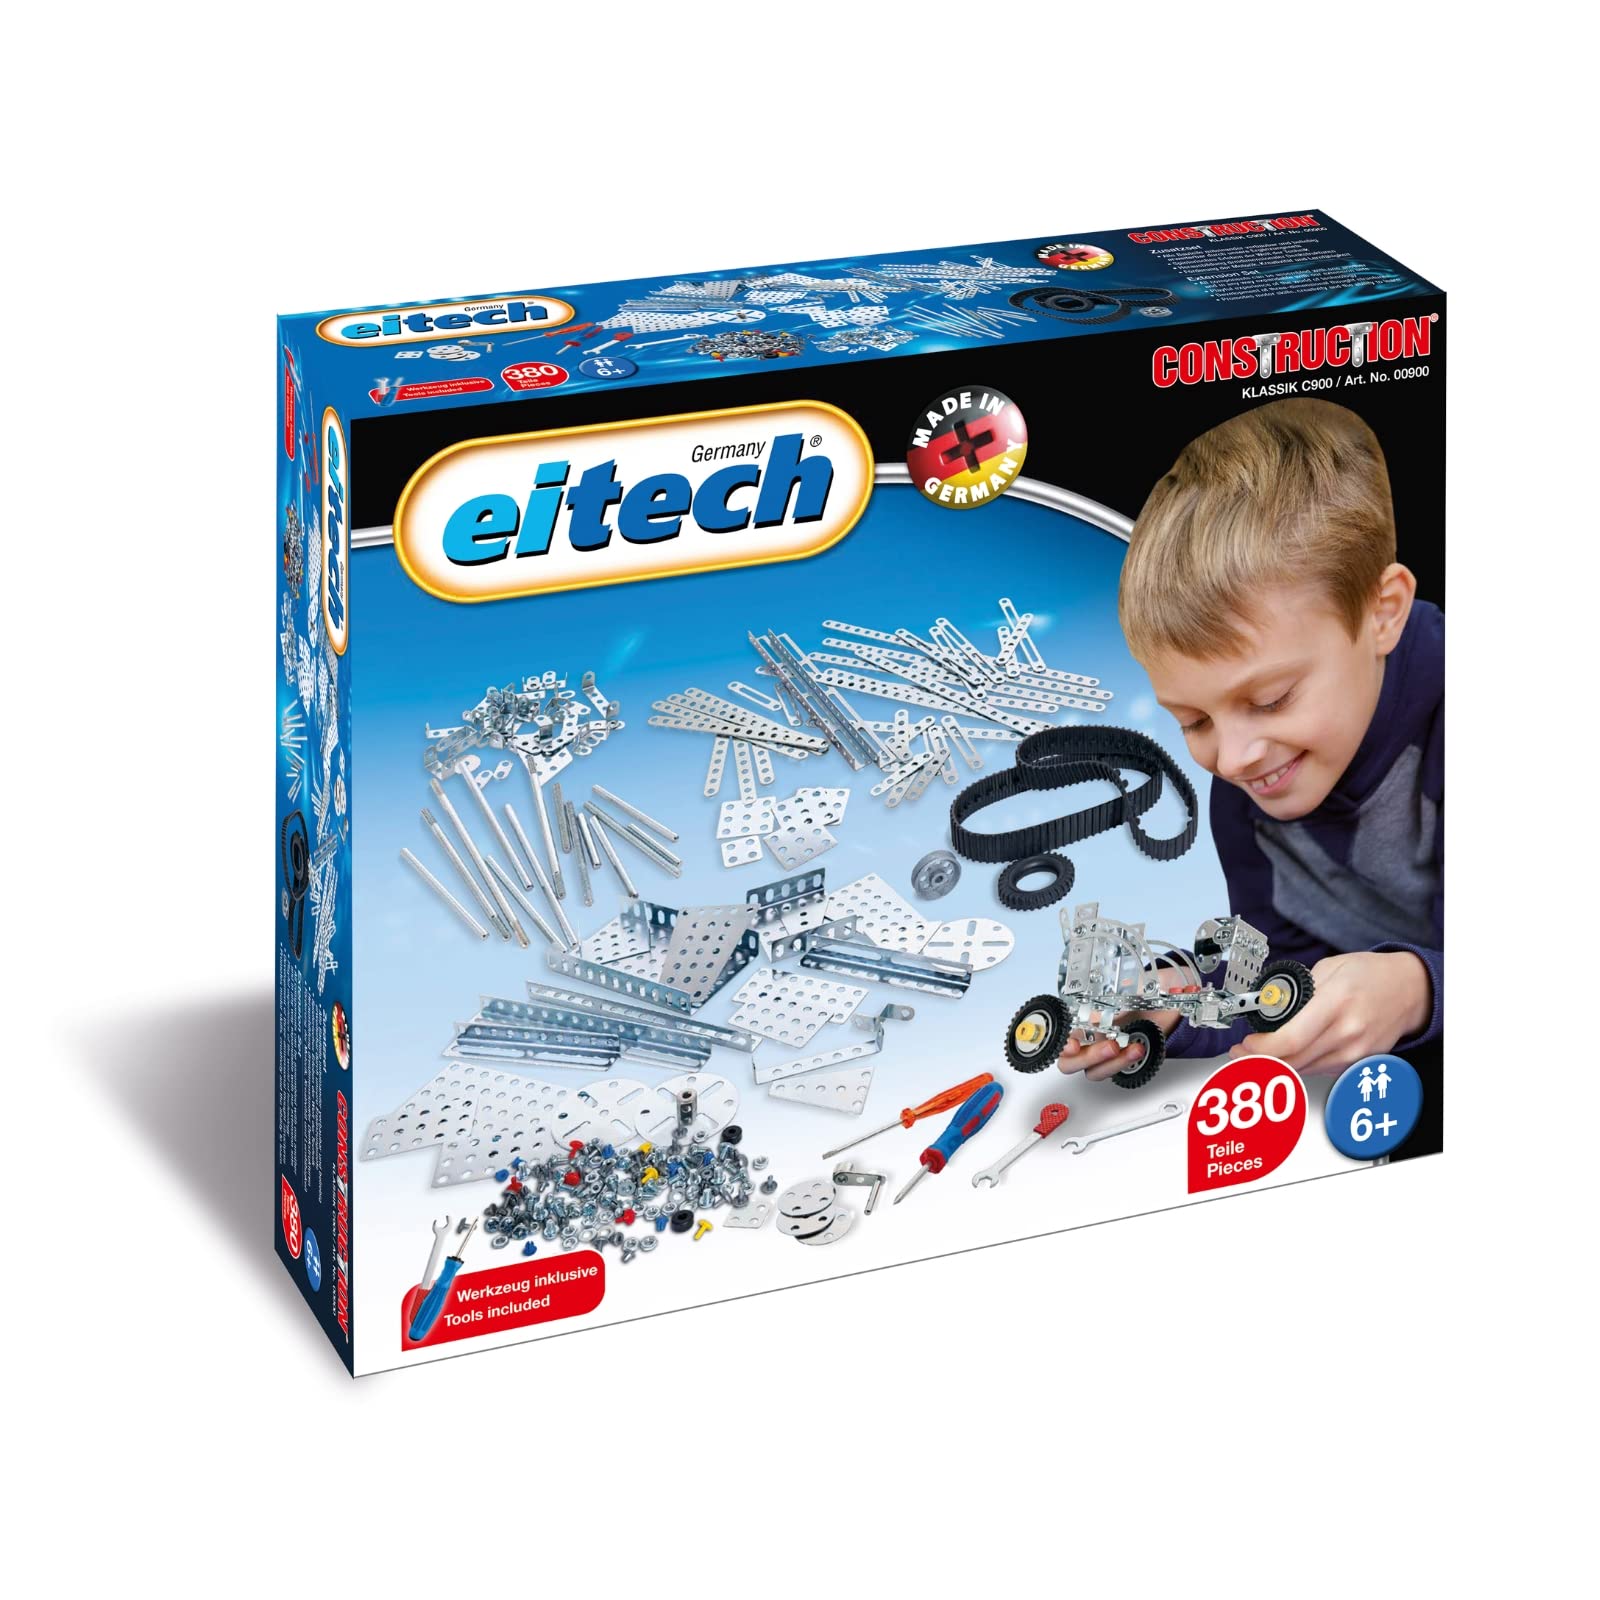 Eitech Expansion Set Educational STEM Toy- Intro to Engineering and STEAM Learning Build and Play Steel Construction Set wit